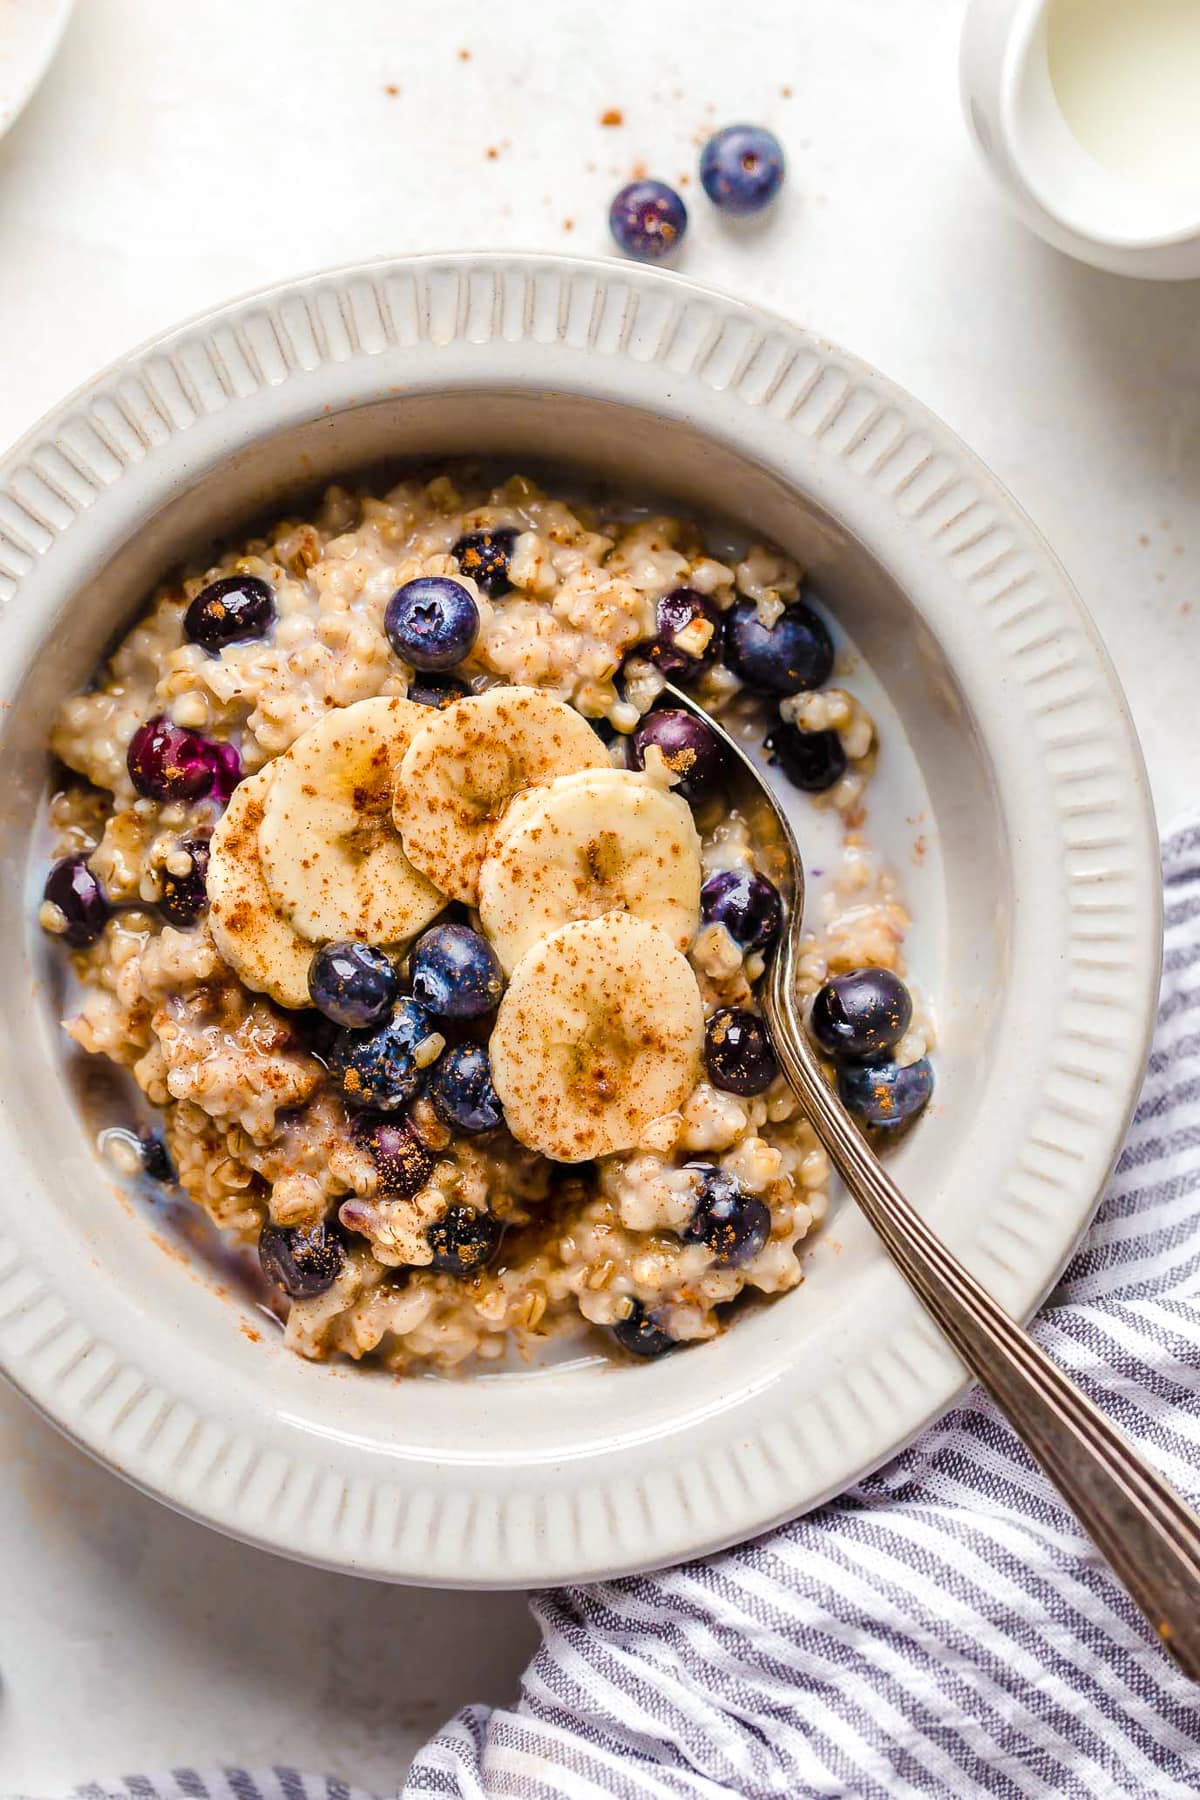 A spoon in a bowl of oats with blueberries and bananas.